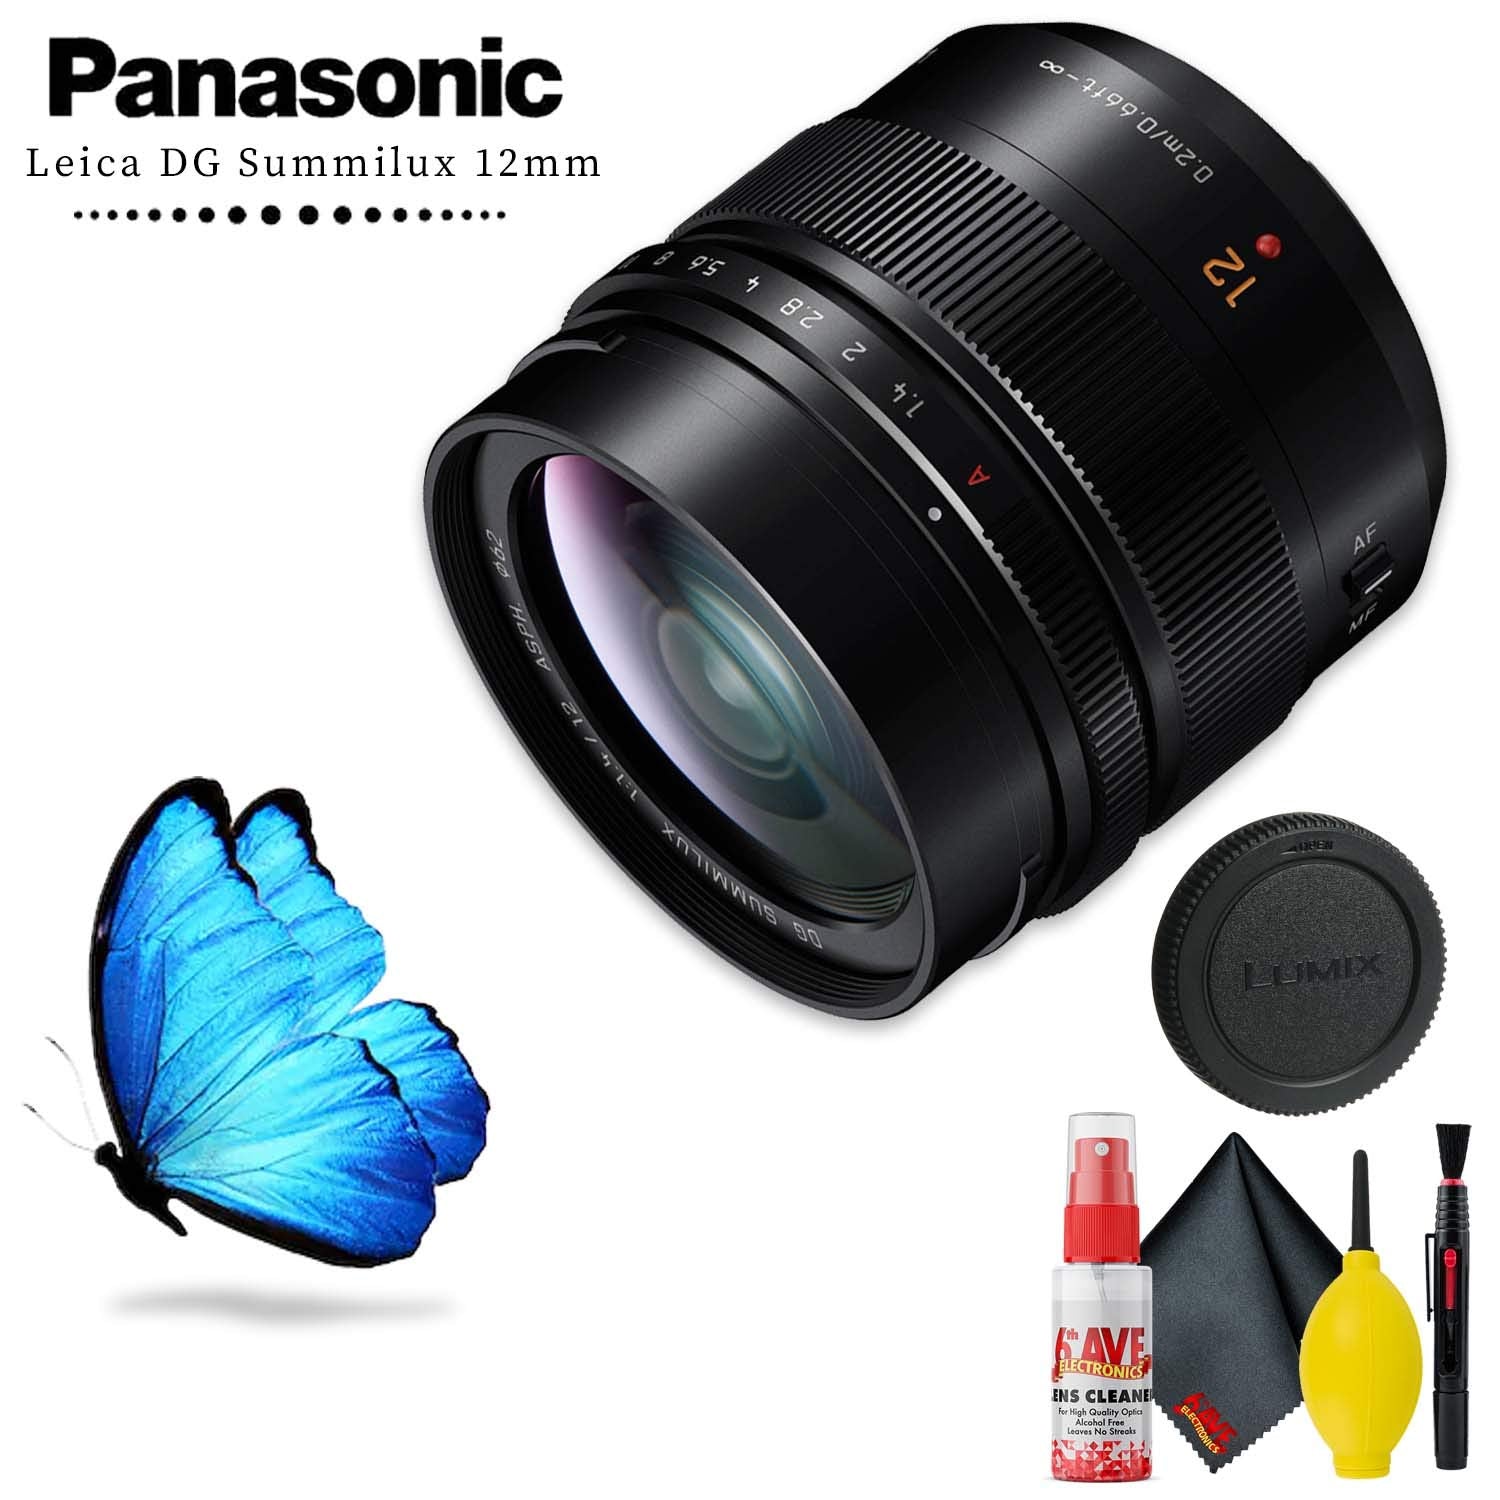 Panasonic Leica DG Summilux 12mm f/1.4 ASPH. Lens With Cleaning Kit